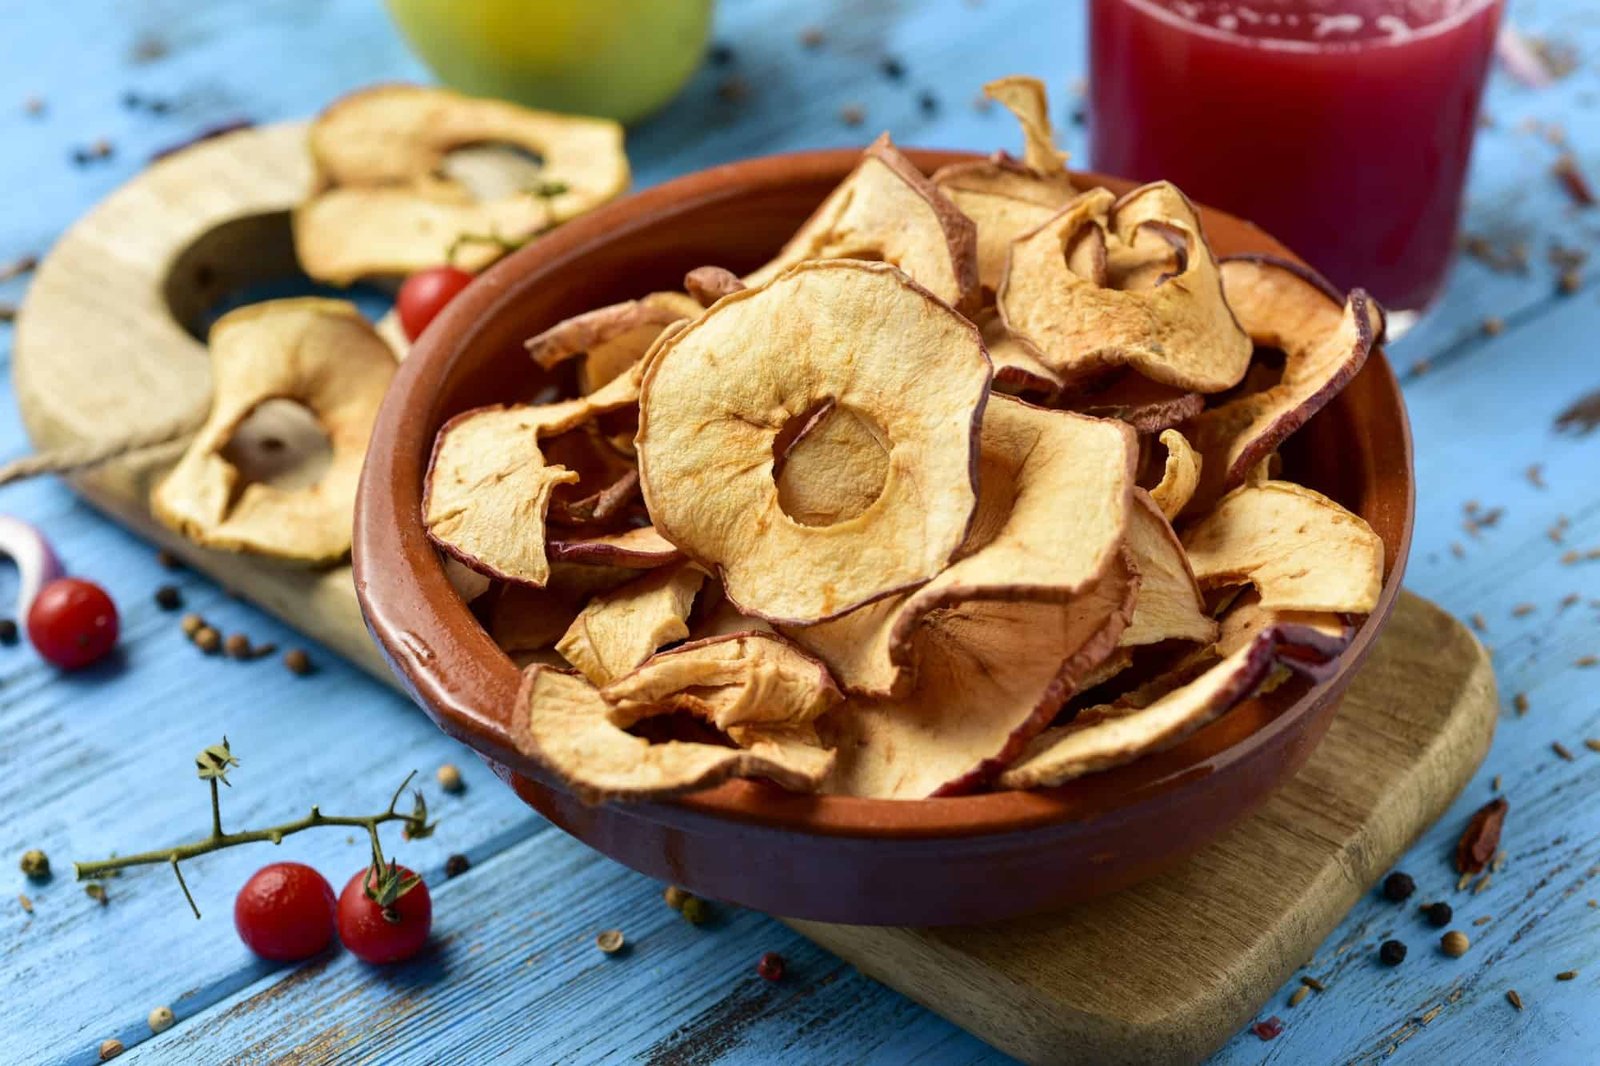 closeup of some slices of dried apple served as appetizer or snack, on a blue rustic wooden table, next to a glass with a red smoothie